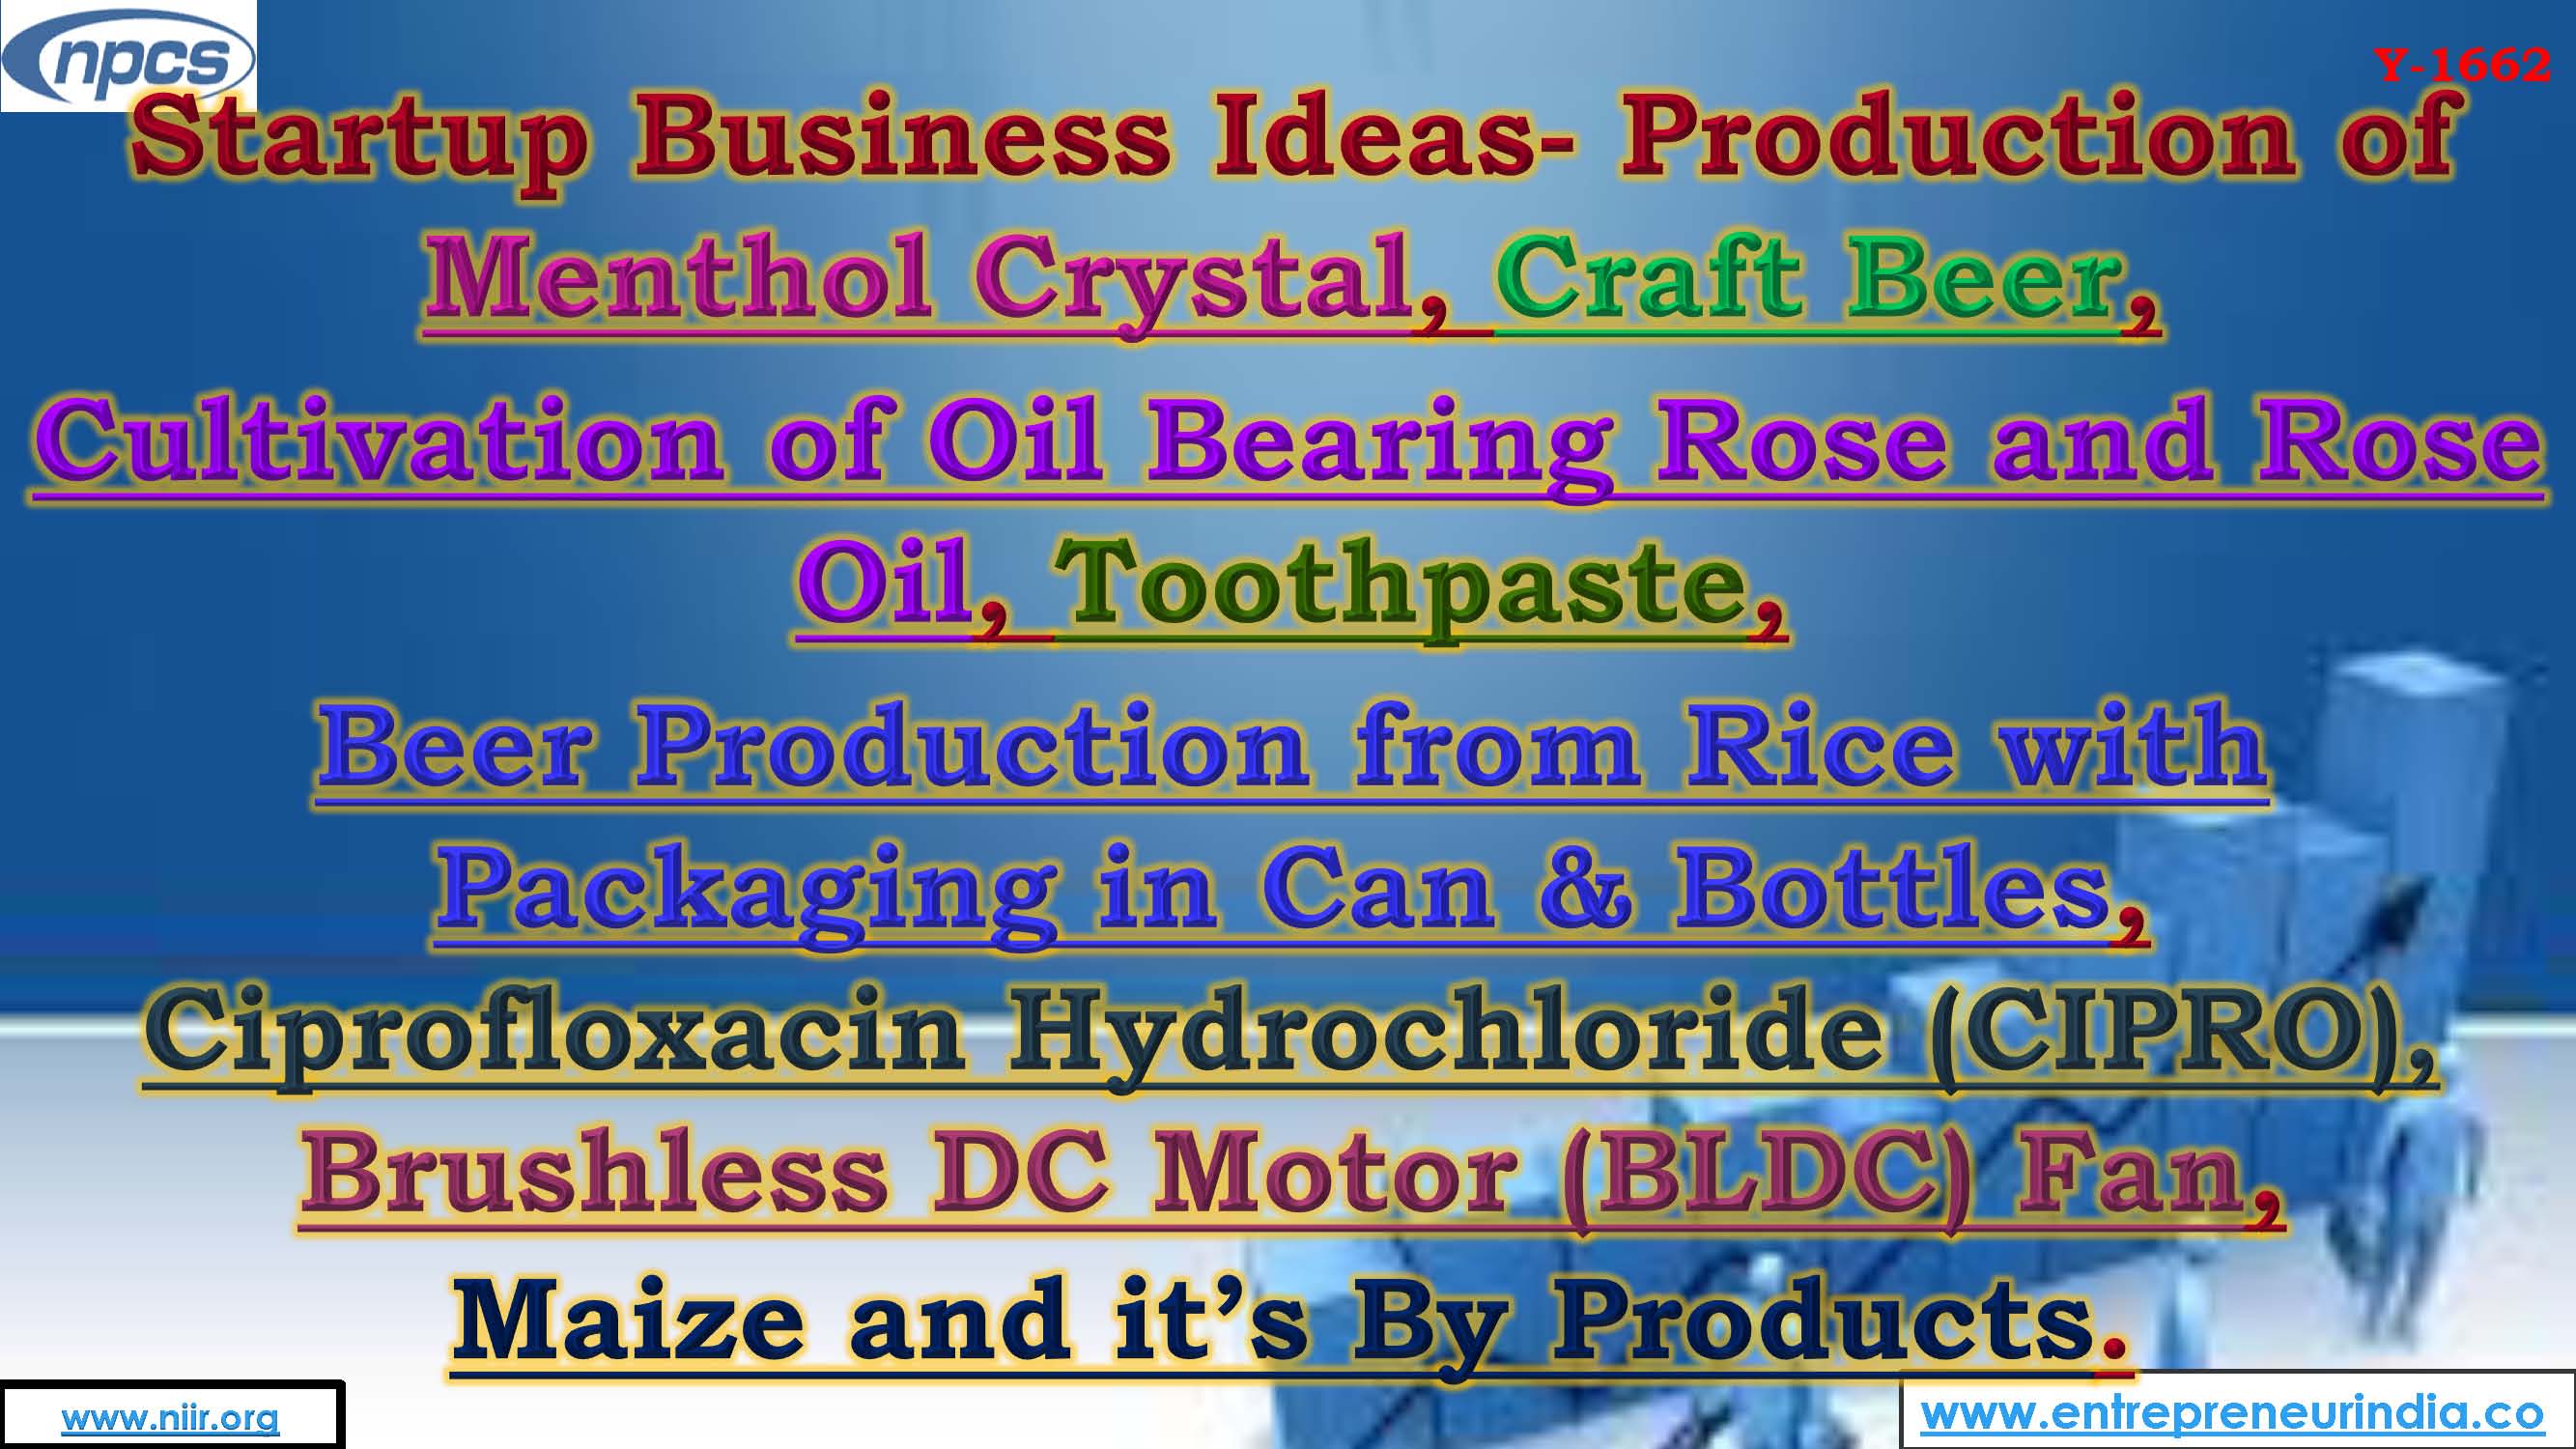 Startup Business Ideas- Production